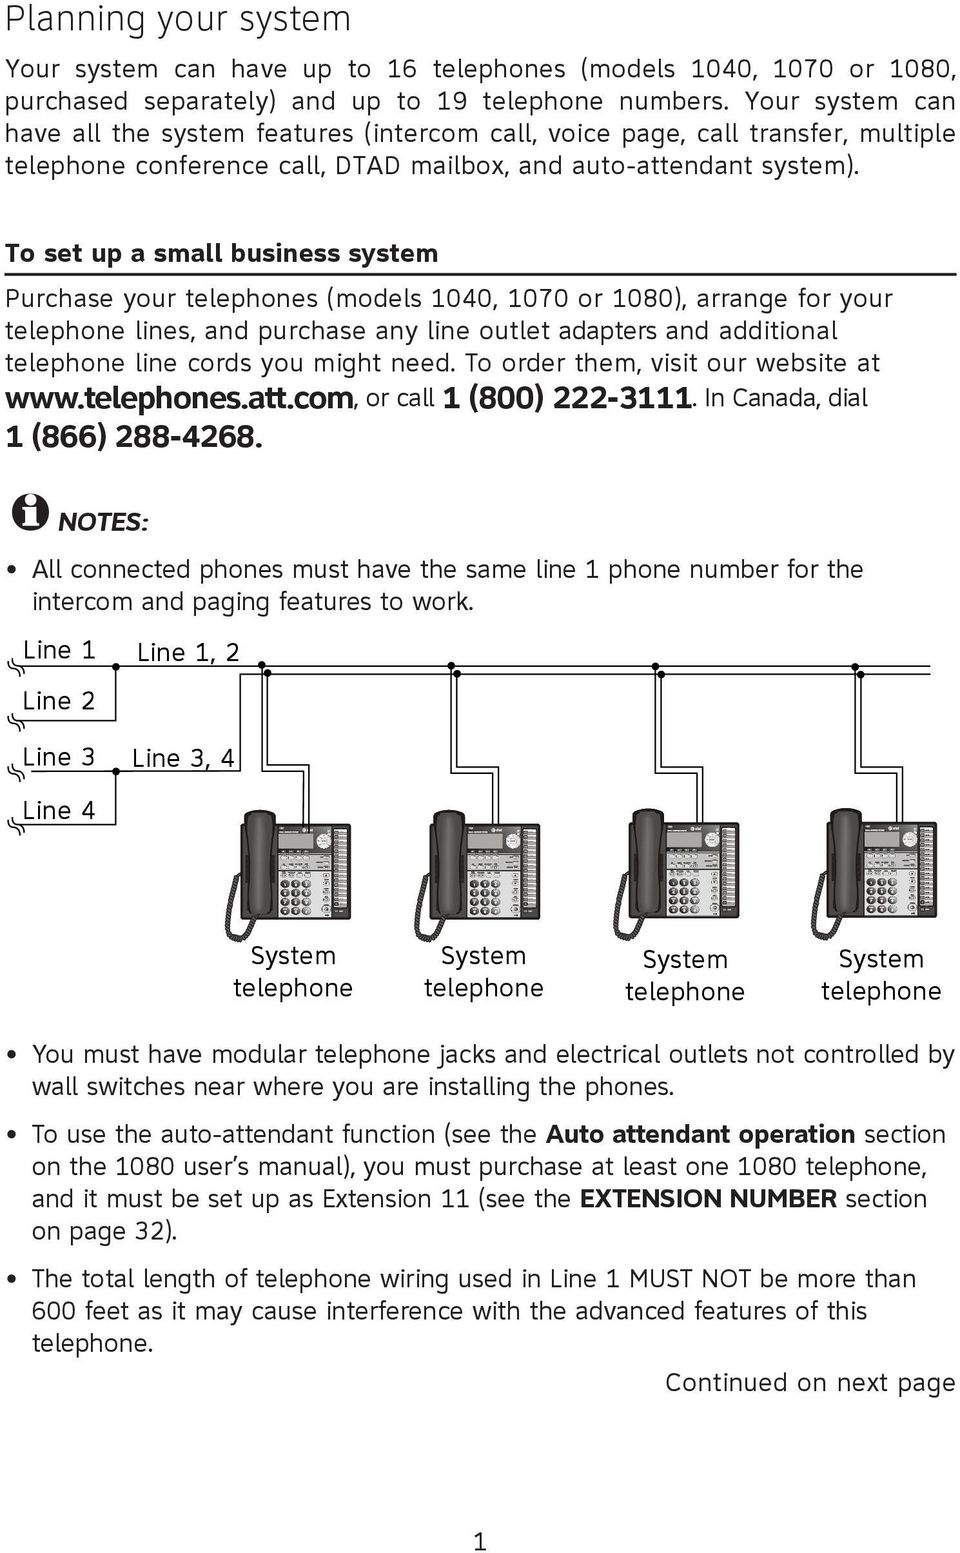 To set up a small business system Purchase your telephones (models 1040, 1070 or 1080), arrange for your telephone lines, and purchase any line outlet adapters and additional telephone line cords you